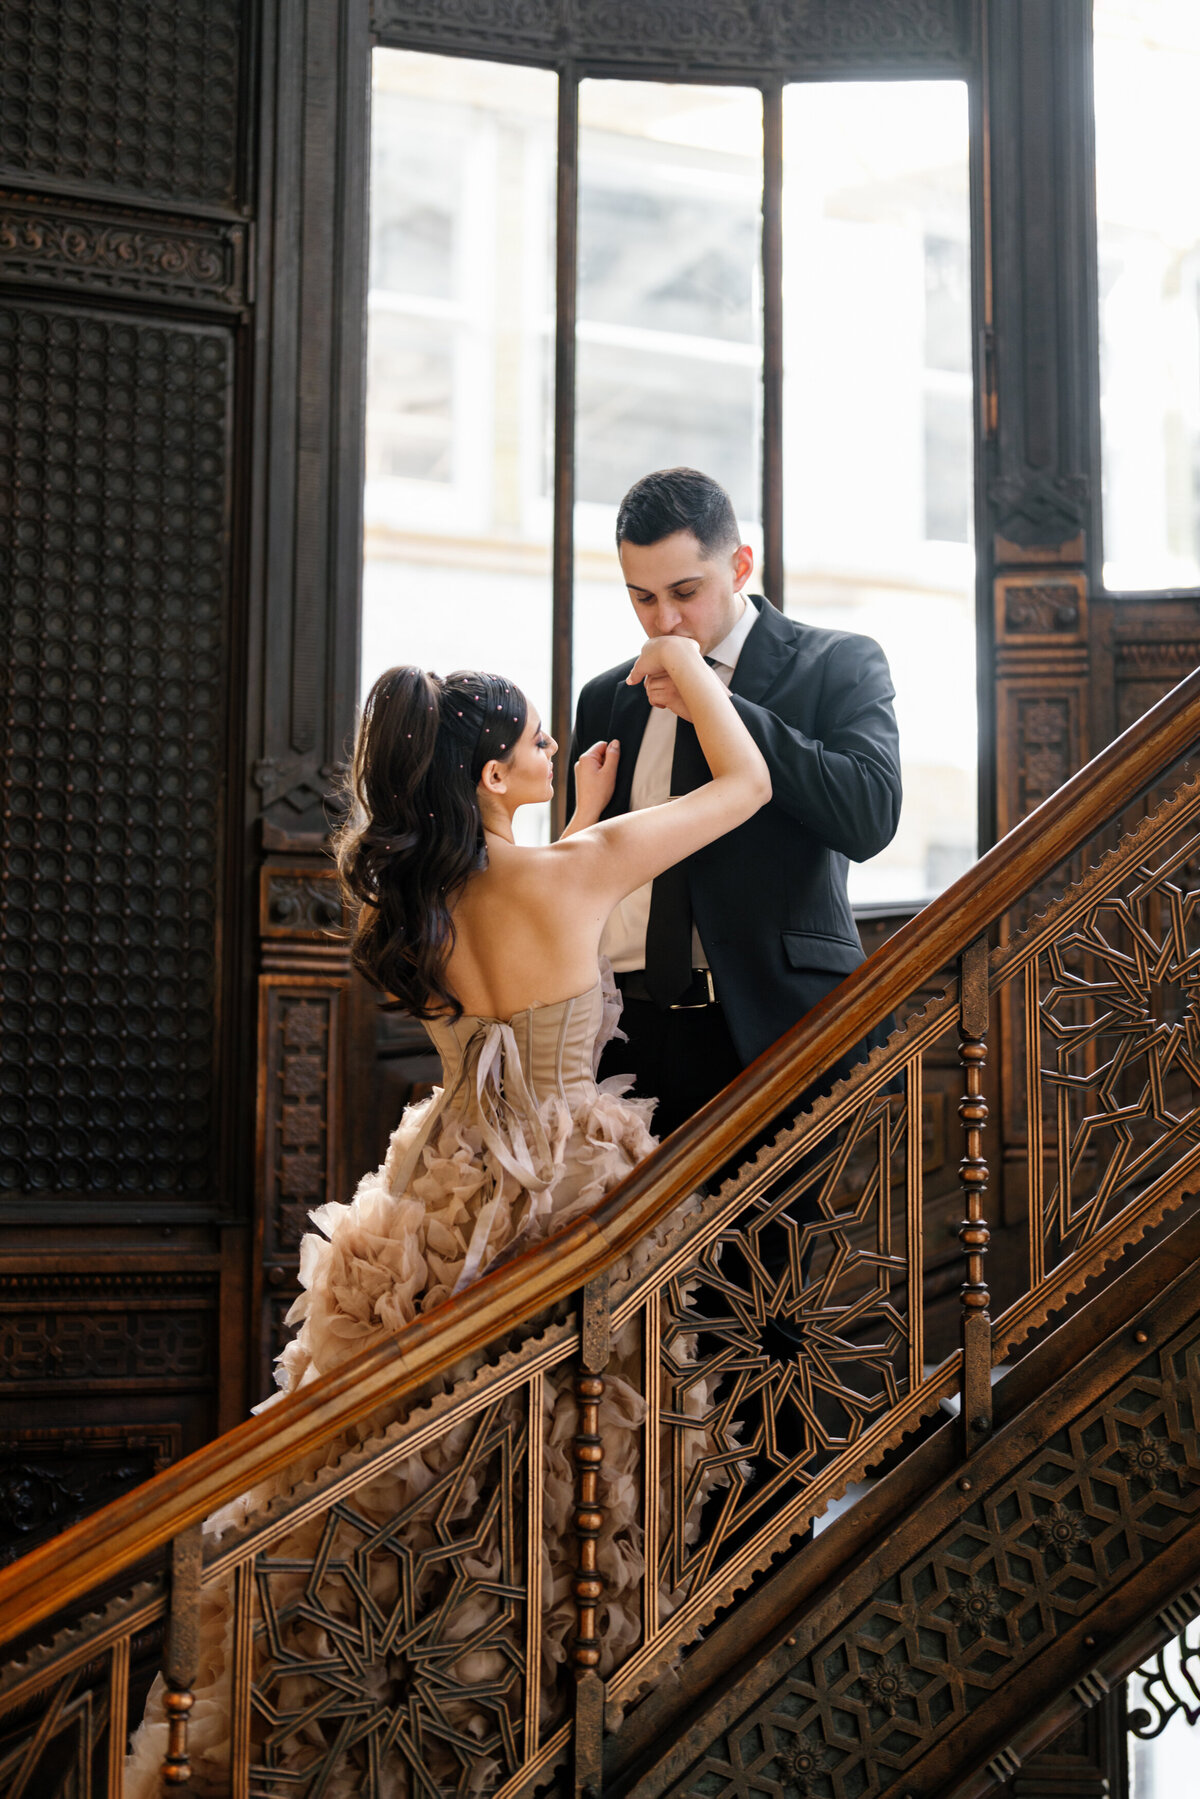 Aspen-Avenue-Chicago-Wedding-Photographer-Rookery-Engagement-Session-Histoircal-Stairs-Moody-Dramatic-Magazine-Unique-Gown-Stemming-From-Love-Emily-Rae-Bridal-Hair-FAV-7